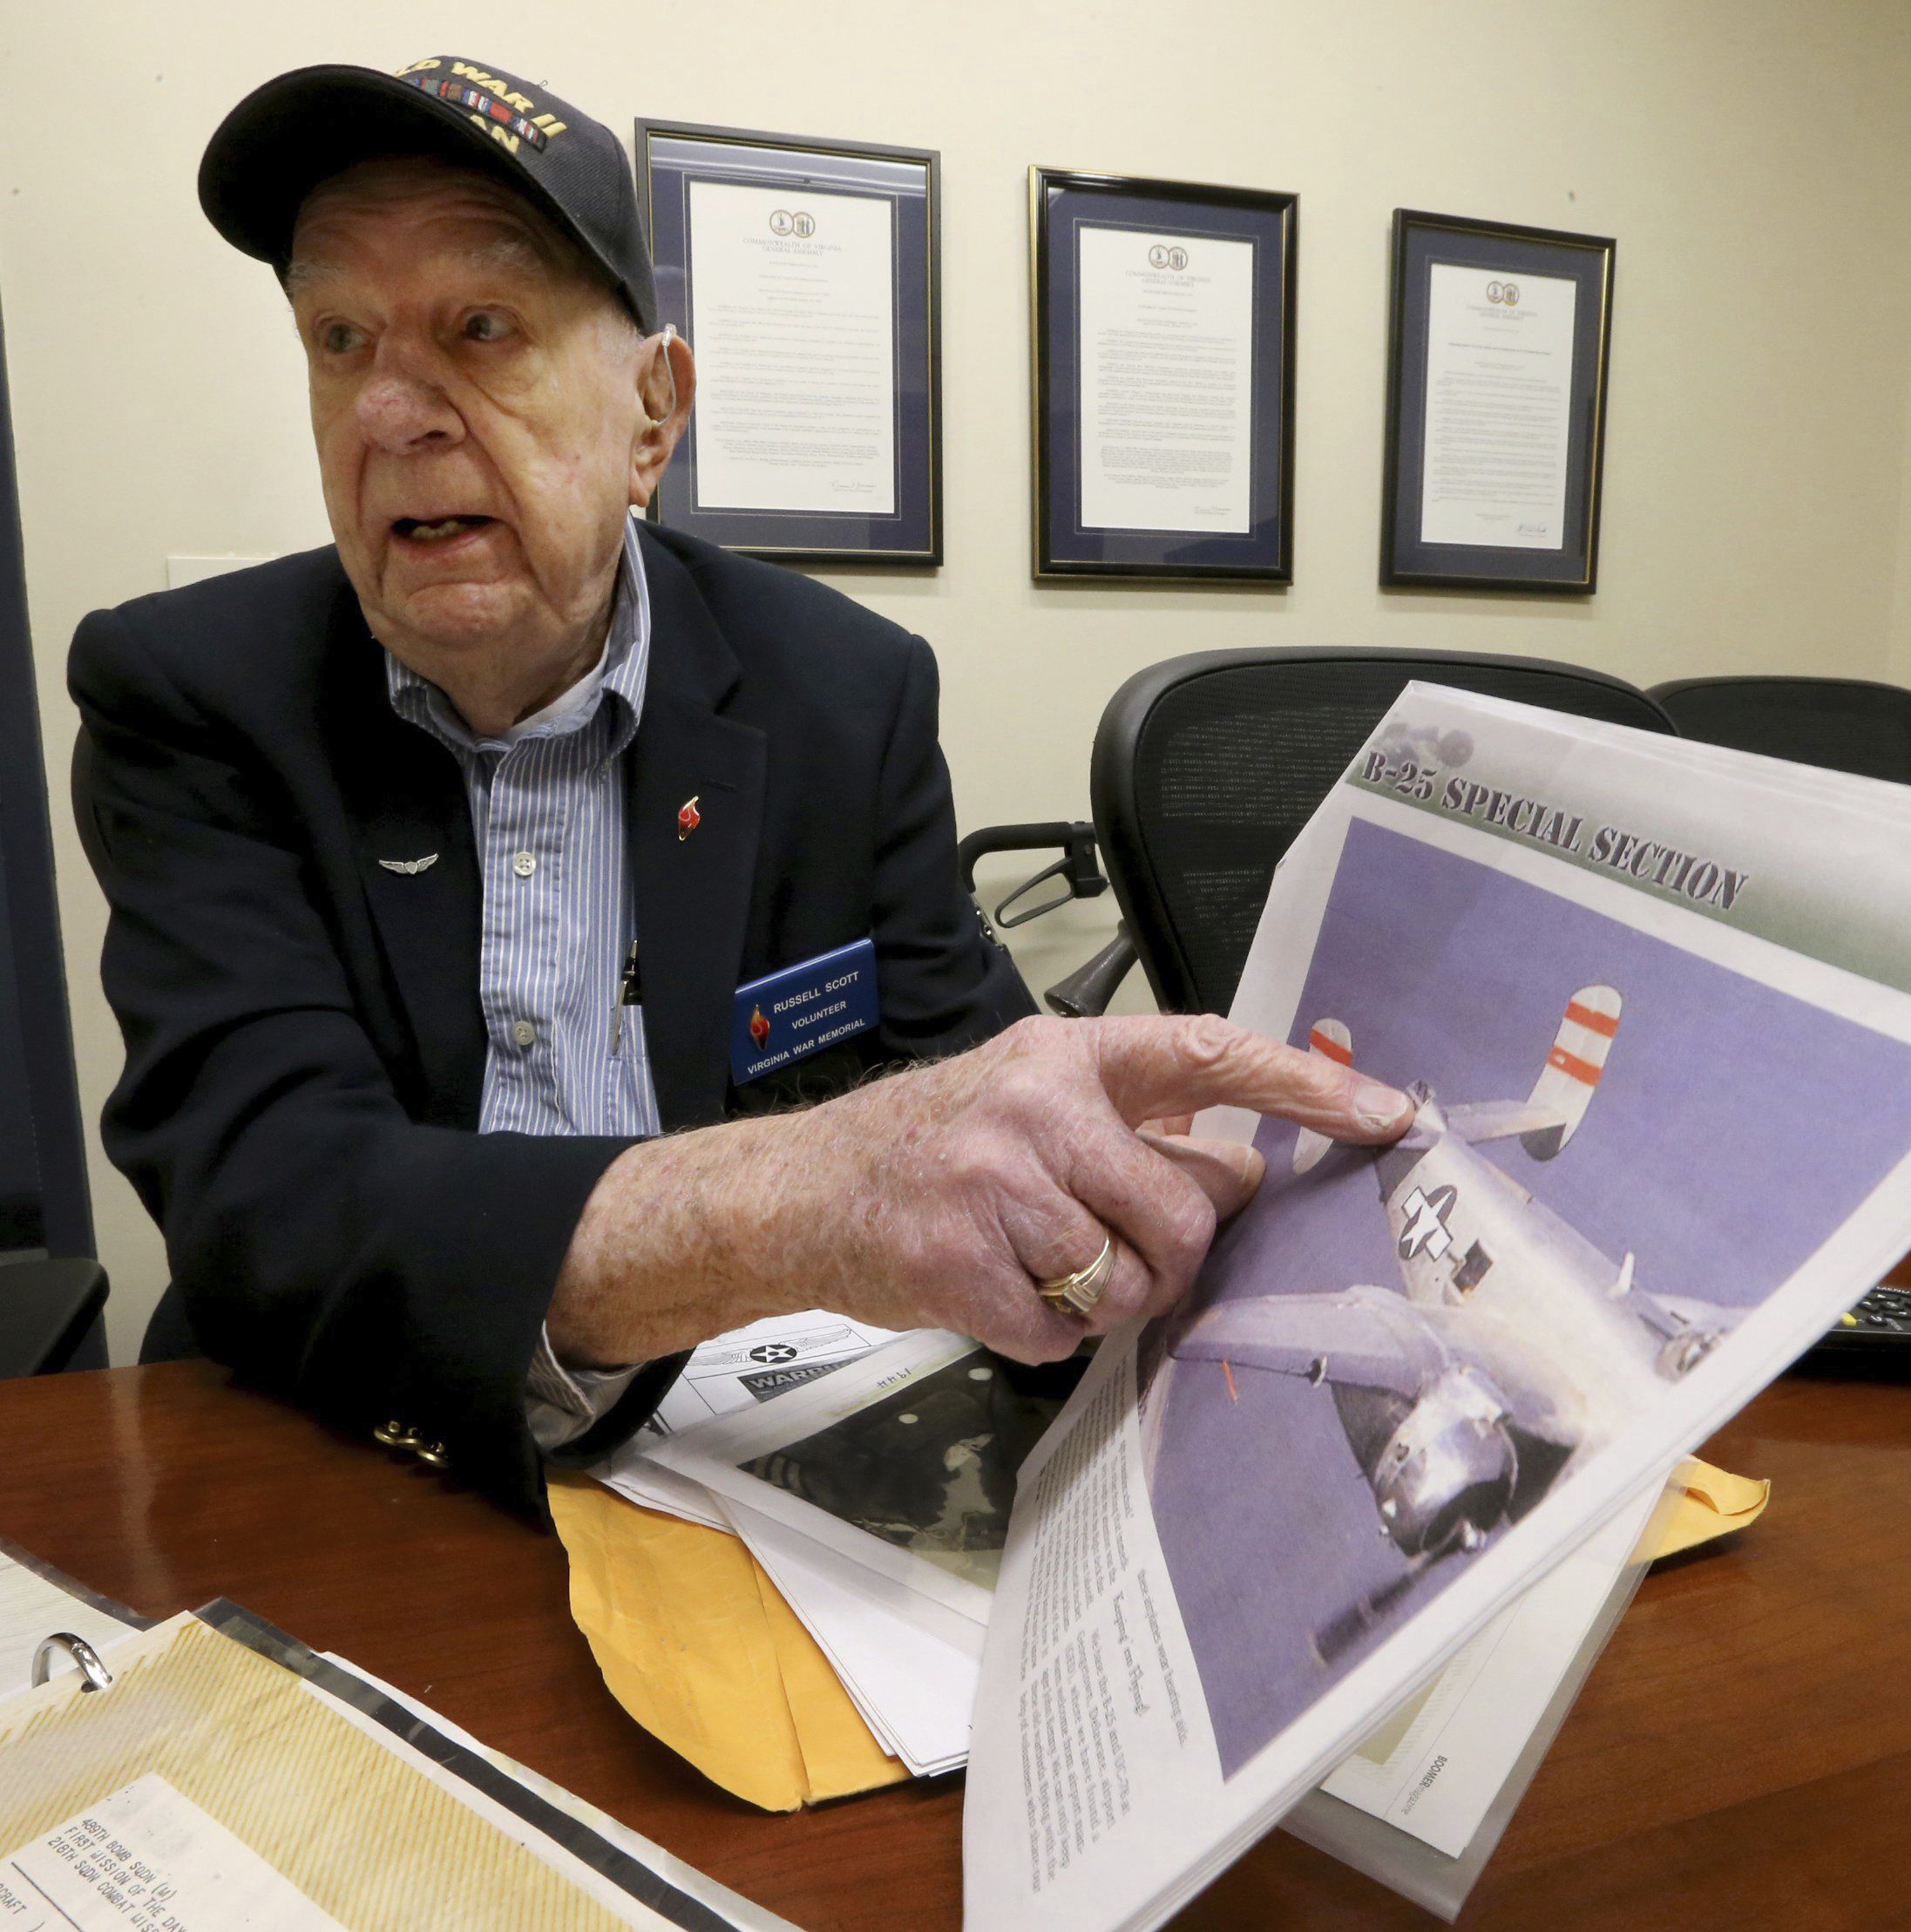 Former WWII POW Russell Scott points to the tail gunner position on a B25J during an interview at the Virginia War Memorial in Richmond, Va., Wednesday, March 26, 2014. (Bob Brown/Richmond Times-Dispatch via AP)